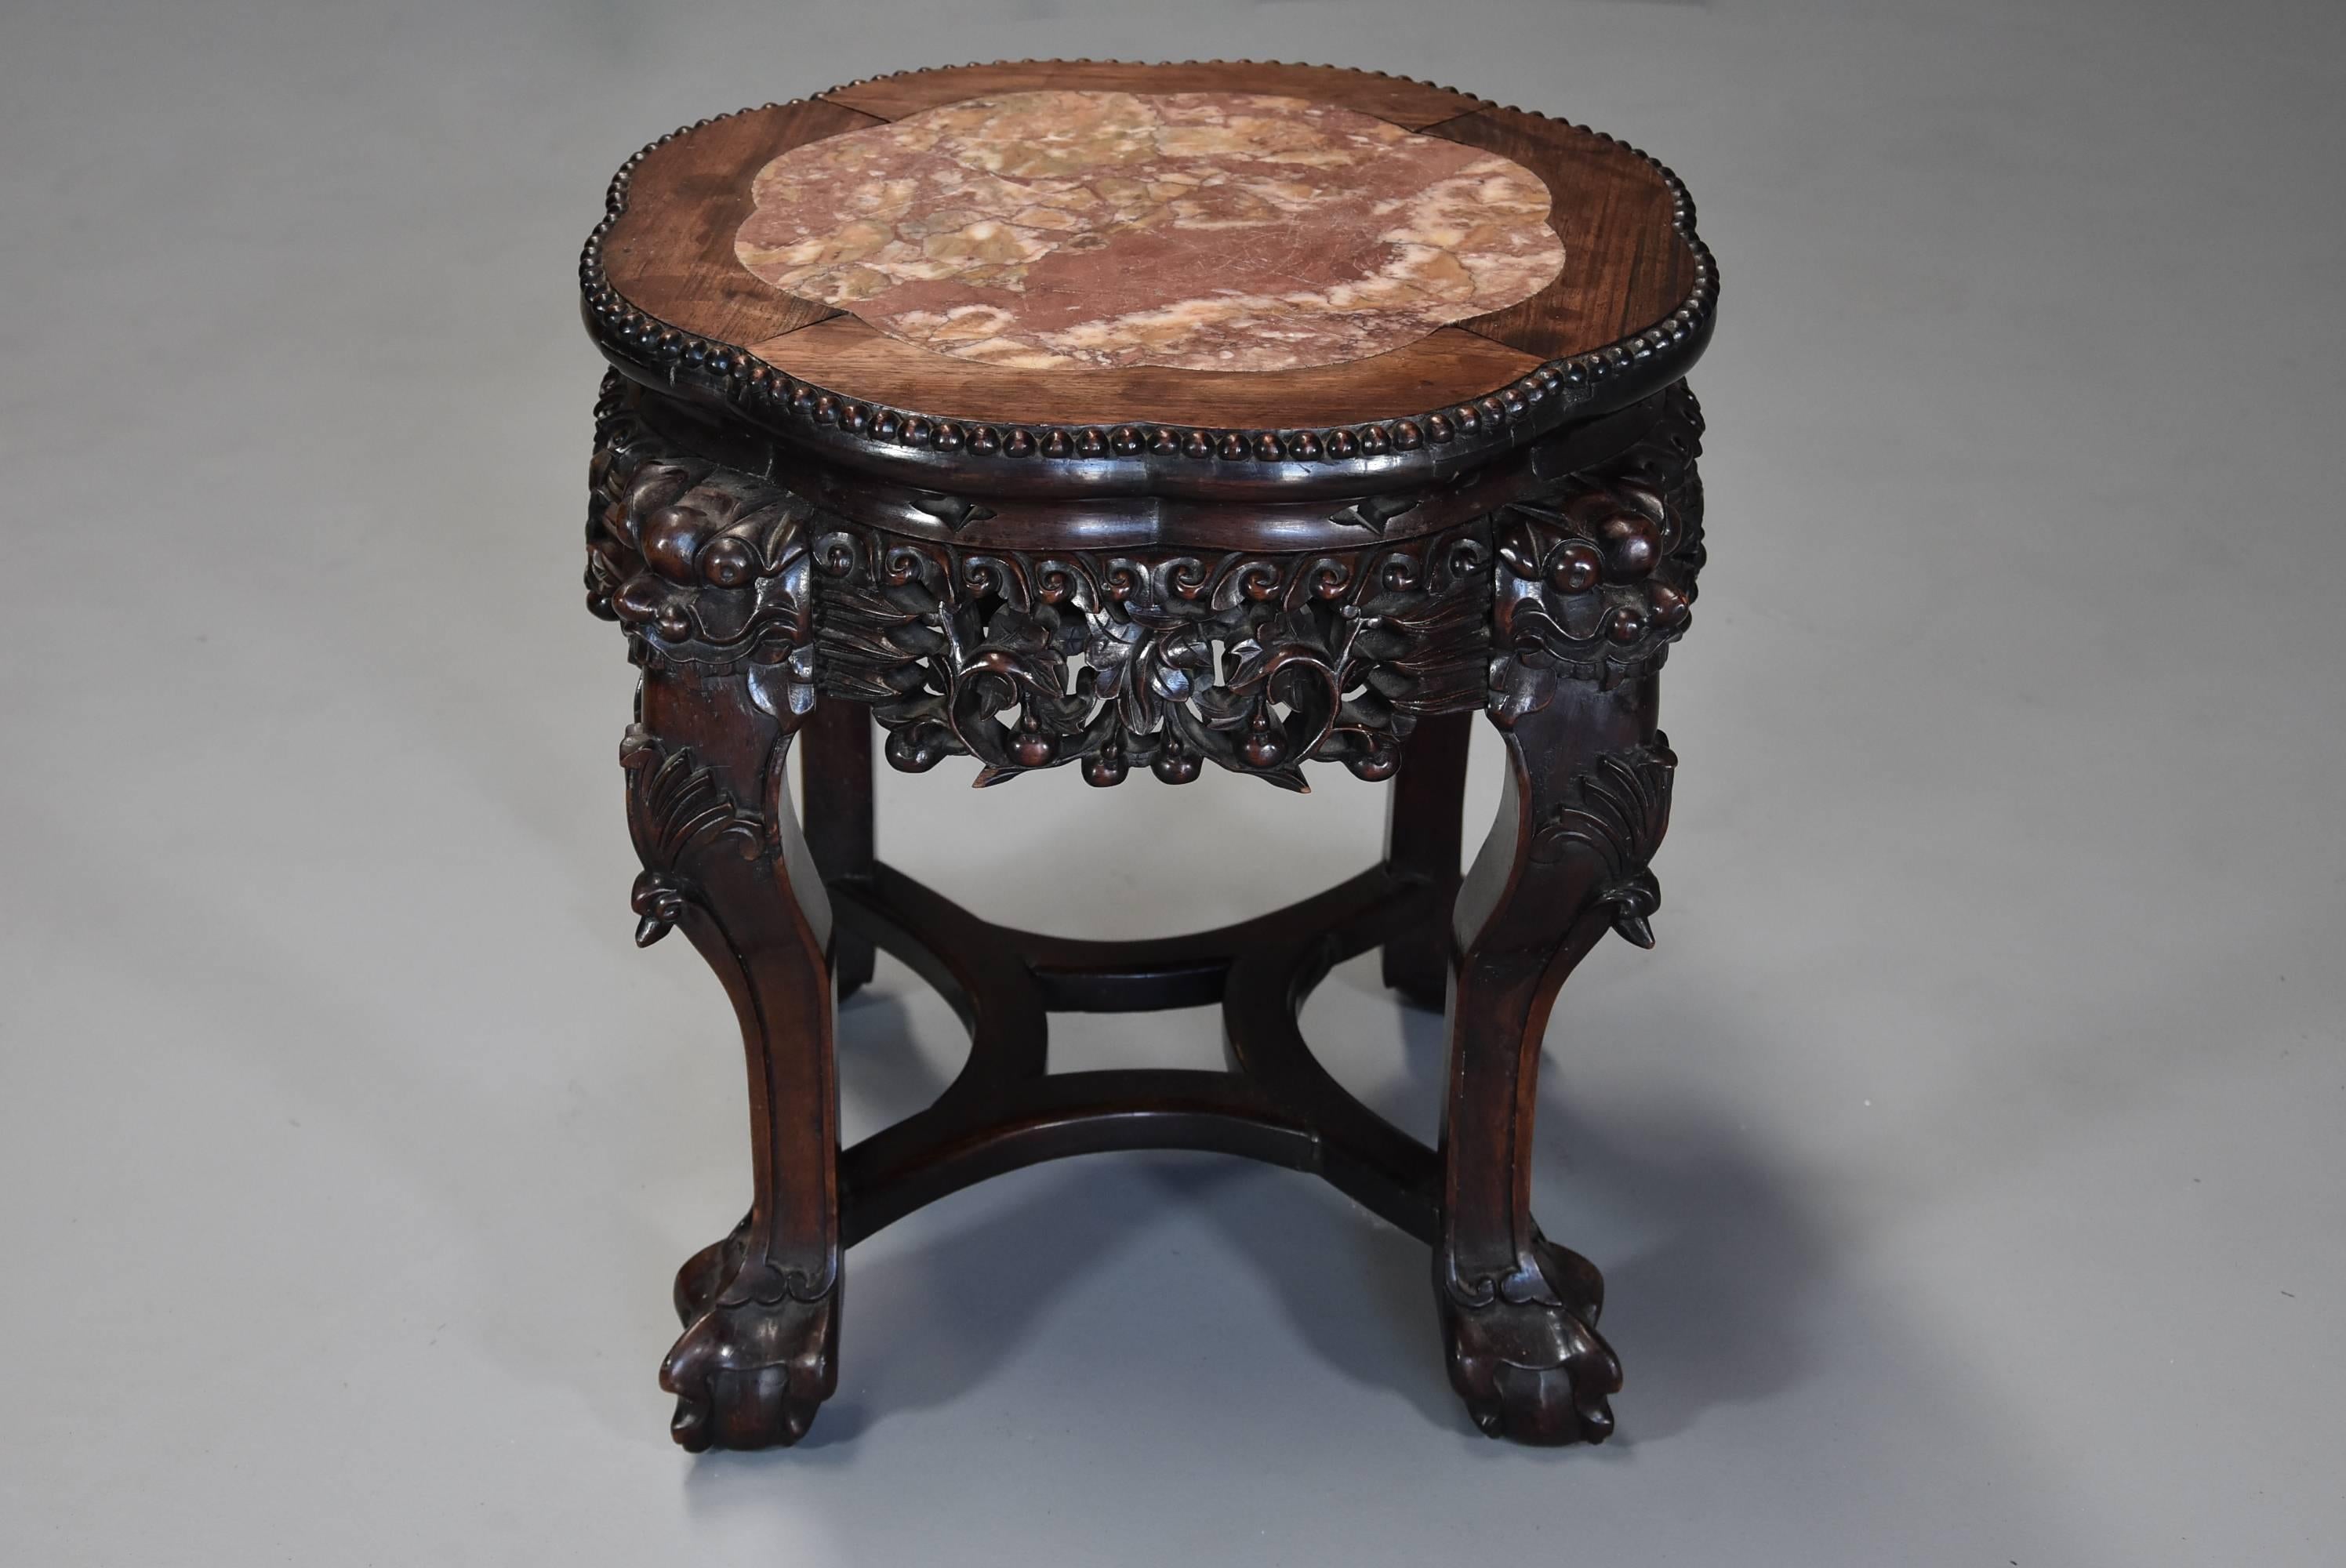 A late 19th century Chinese hardwood pot stand or low table with shaped marble inset top. 

This pot stand consists of a shaped Chinese rouge marble top recessed into a hardwood top with carved ball decoration to the edge.

This leads down to a